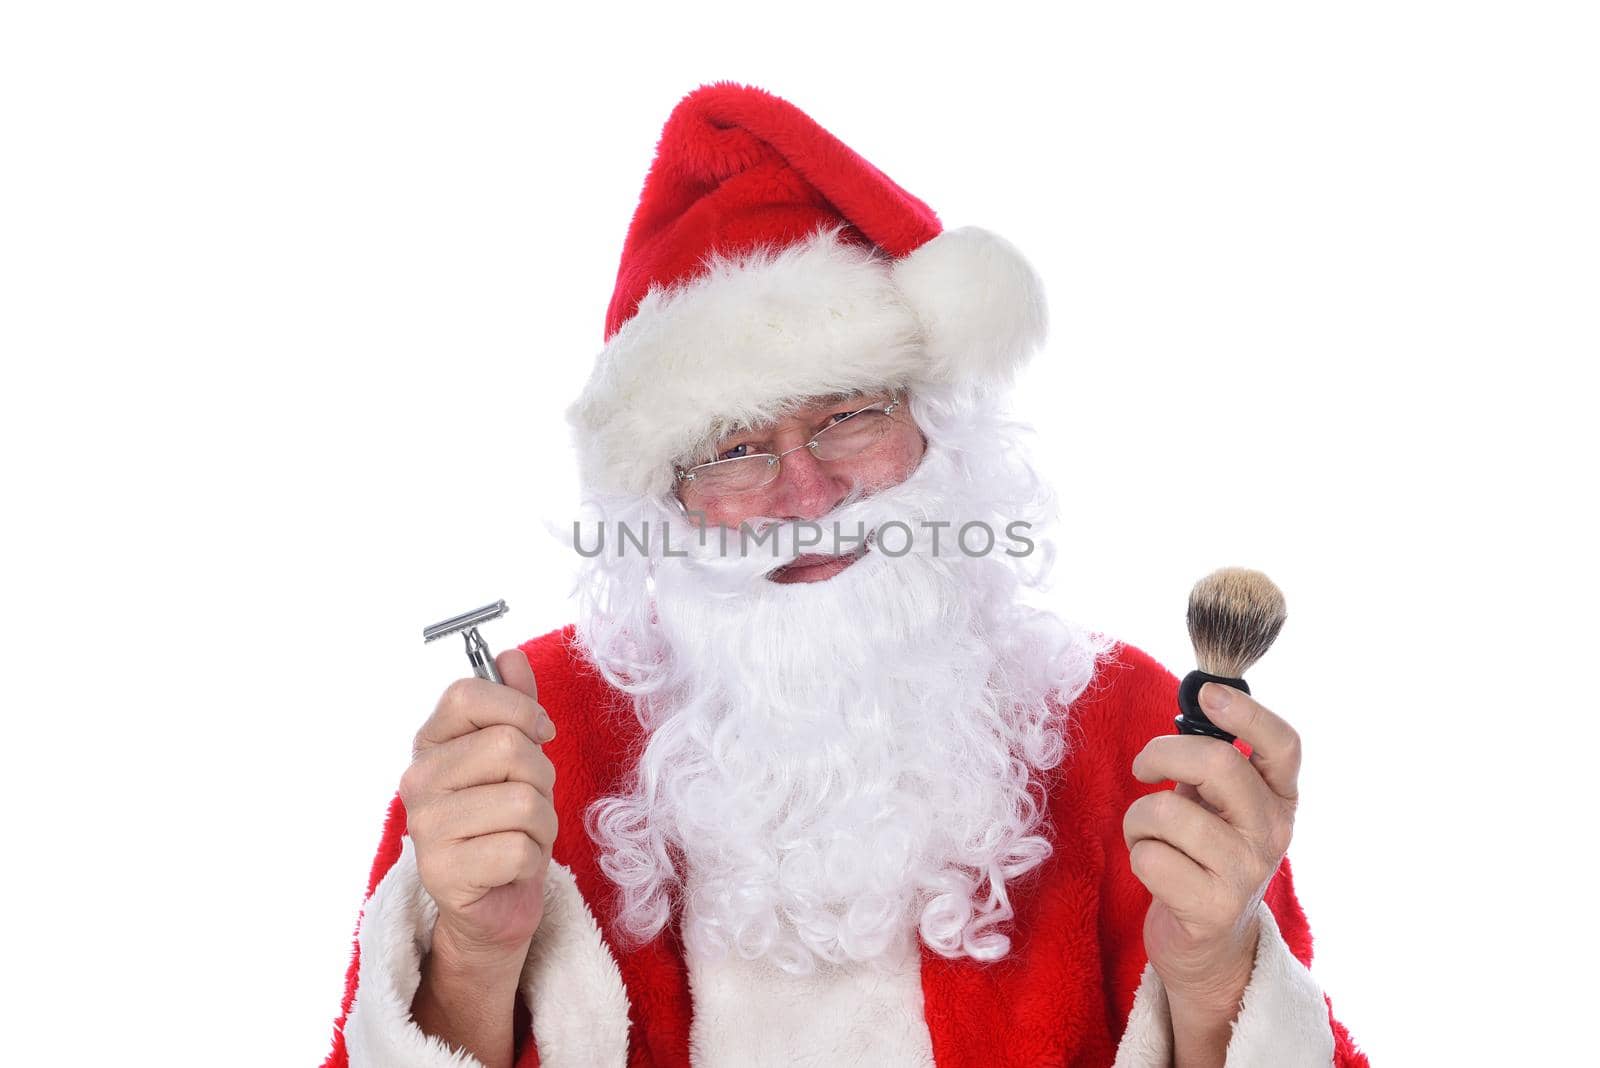 Closeup of Santa Claus holding a razor and shaving brush, contemplating cutting off his beard. by sCukrov